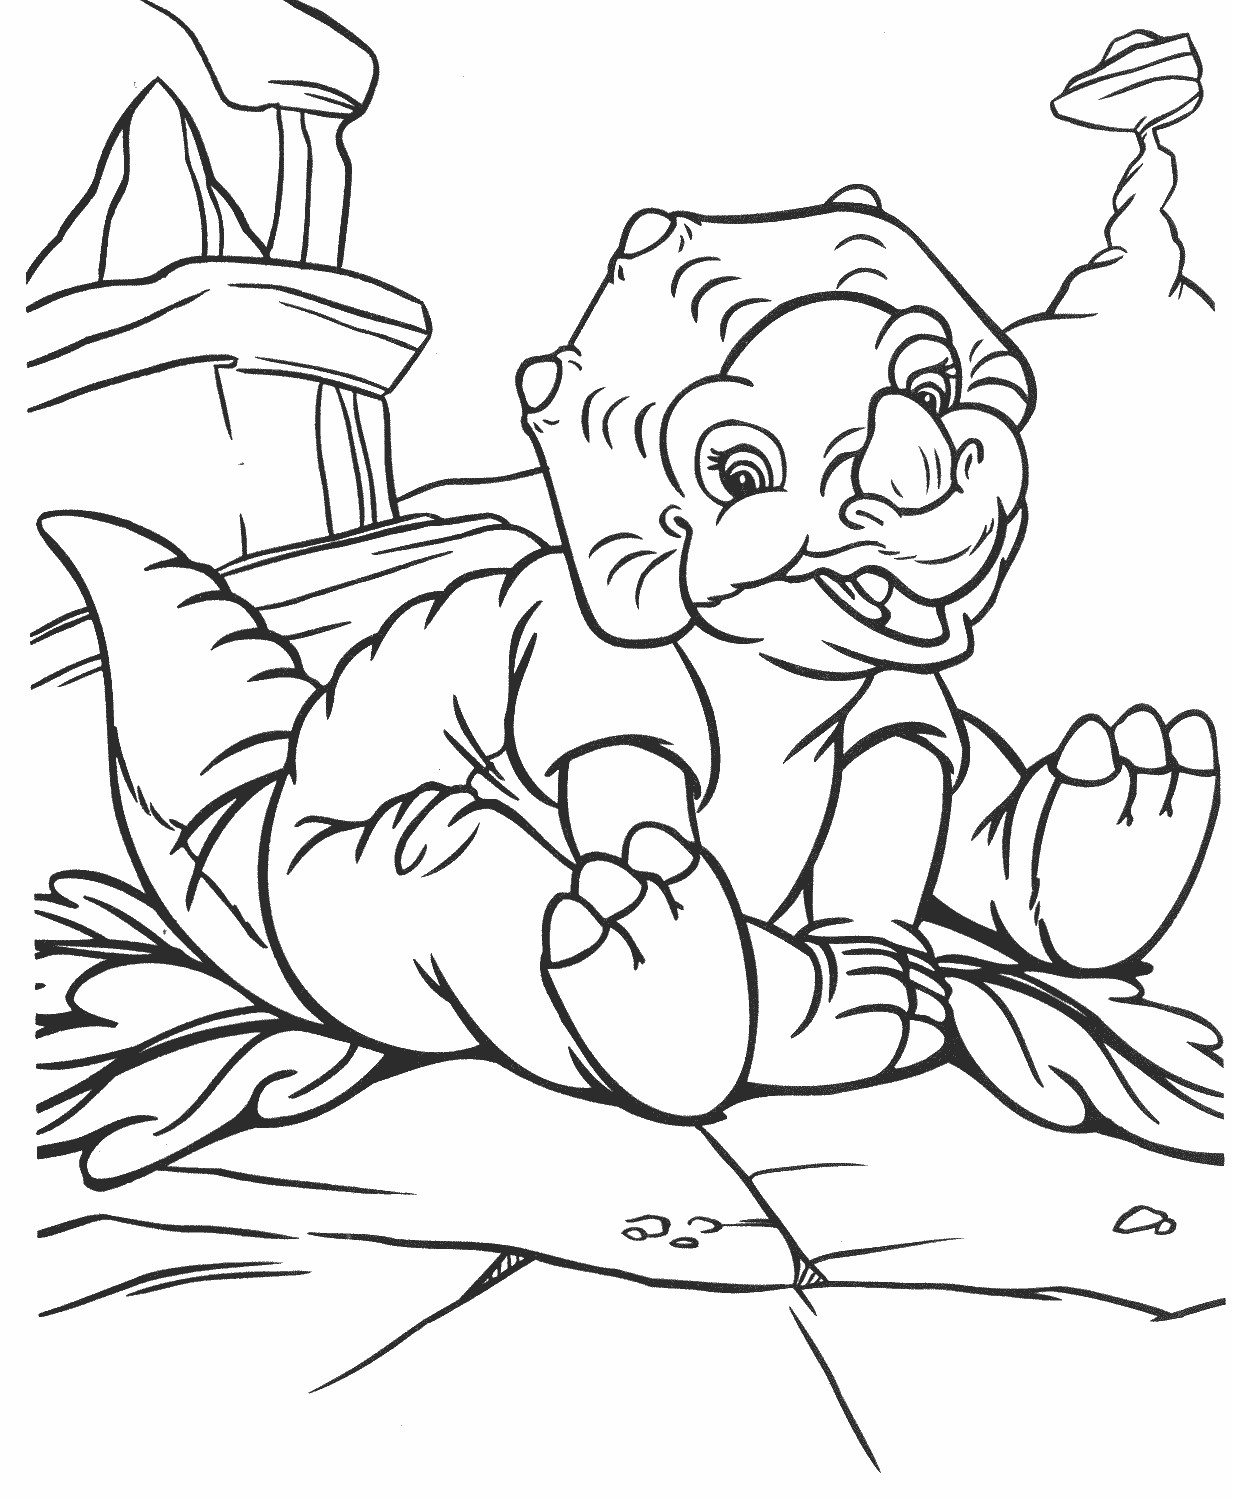 Coloring Pages For Kids Dinosaurs
 dinosaur animals coloring pages dinosaur coloring pages